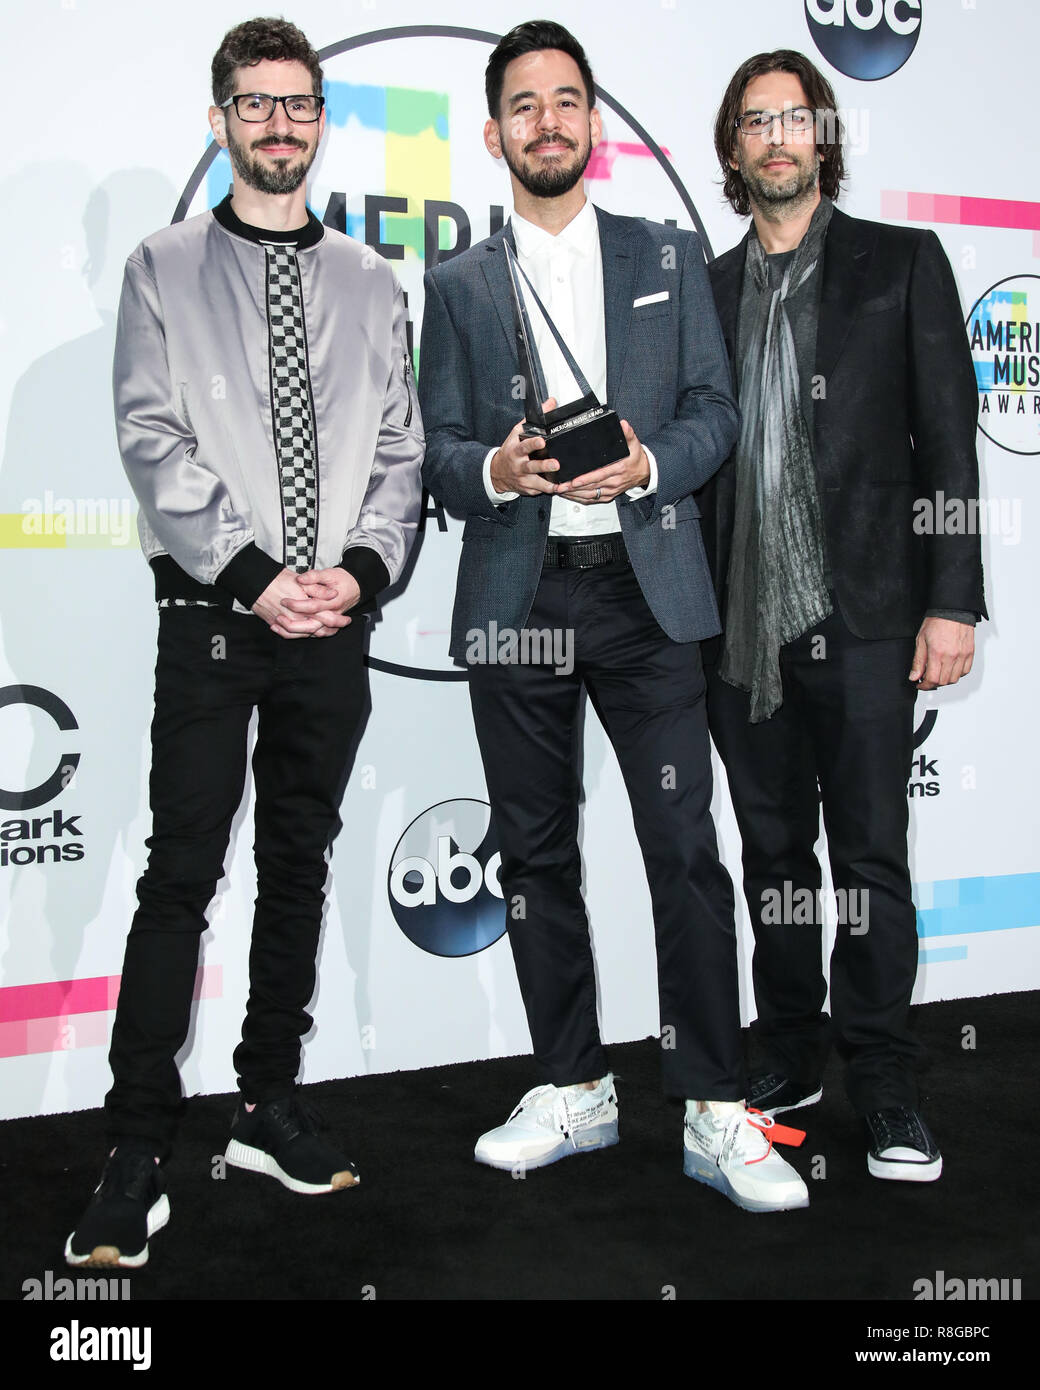 LOS ANGELES, CA, USA - NOVEMBER 19: Brad Delson, Mike Shinoda, Rob Bourdon, Linkin Park in the press room during the 2017 American Music Awards held at the Microsoft Theatre L.A. Live on November 19, 2017 in Los Angeles, California, United States. (Photo by Xavier Collin/Image Press Agency) Stock Photo